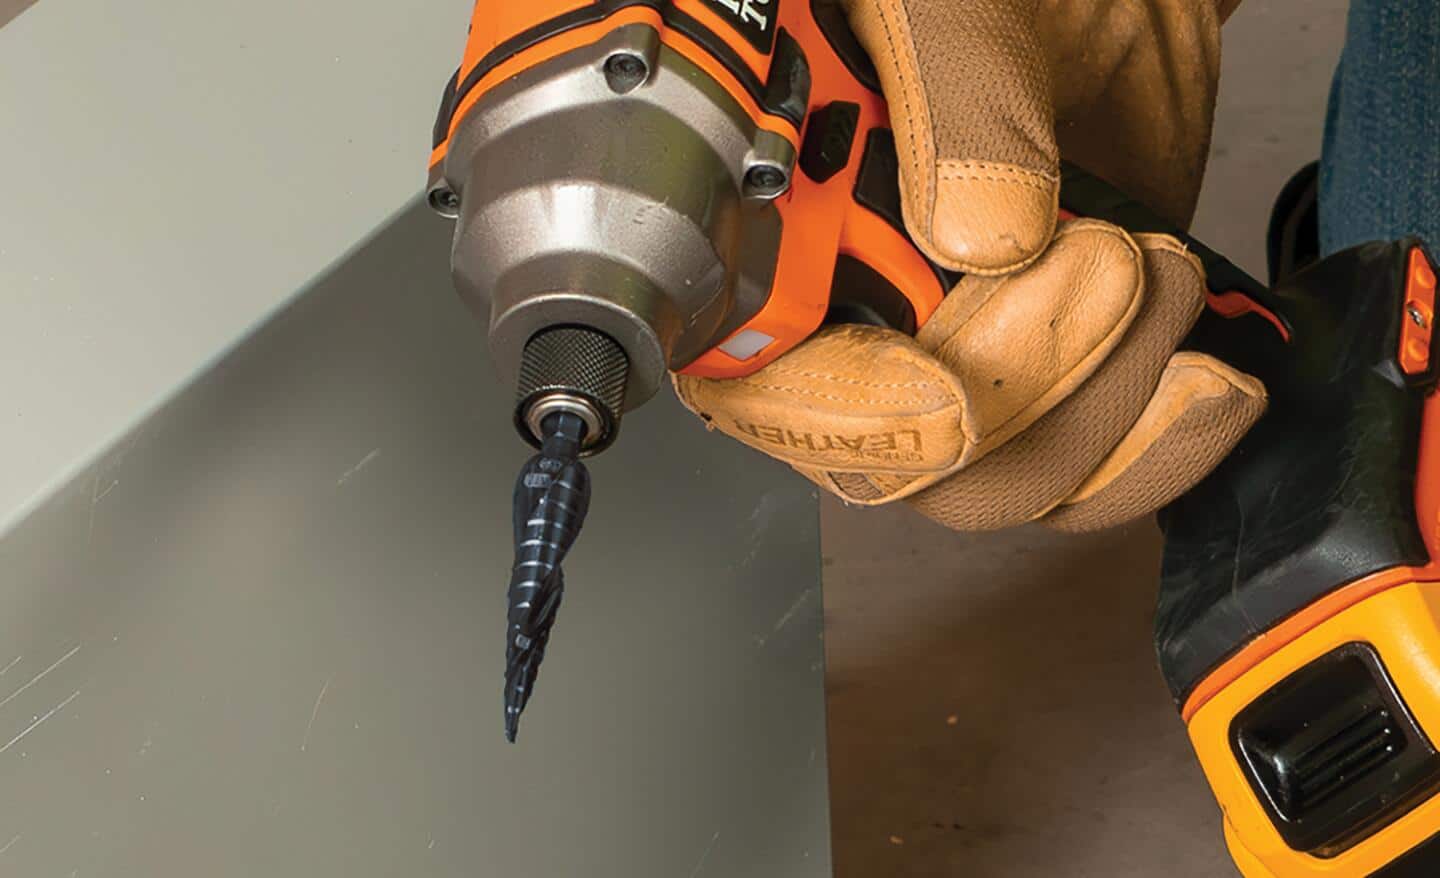 A person holding an orange drill with a step drill bit.